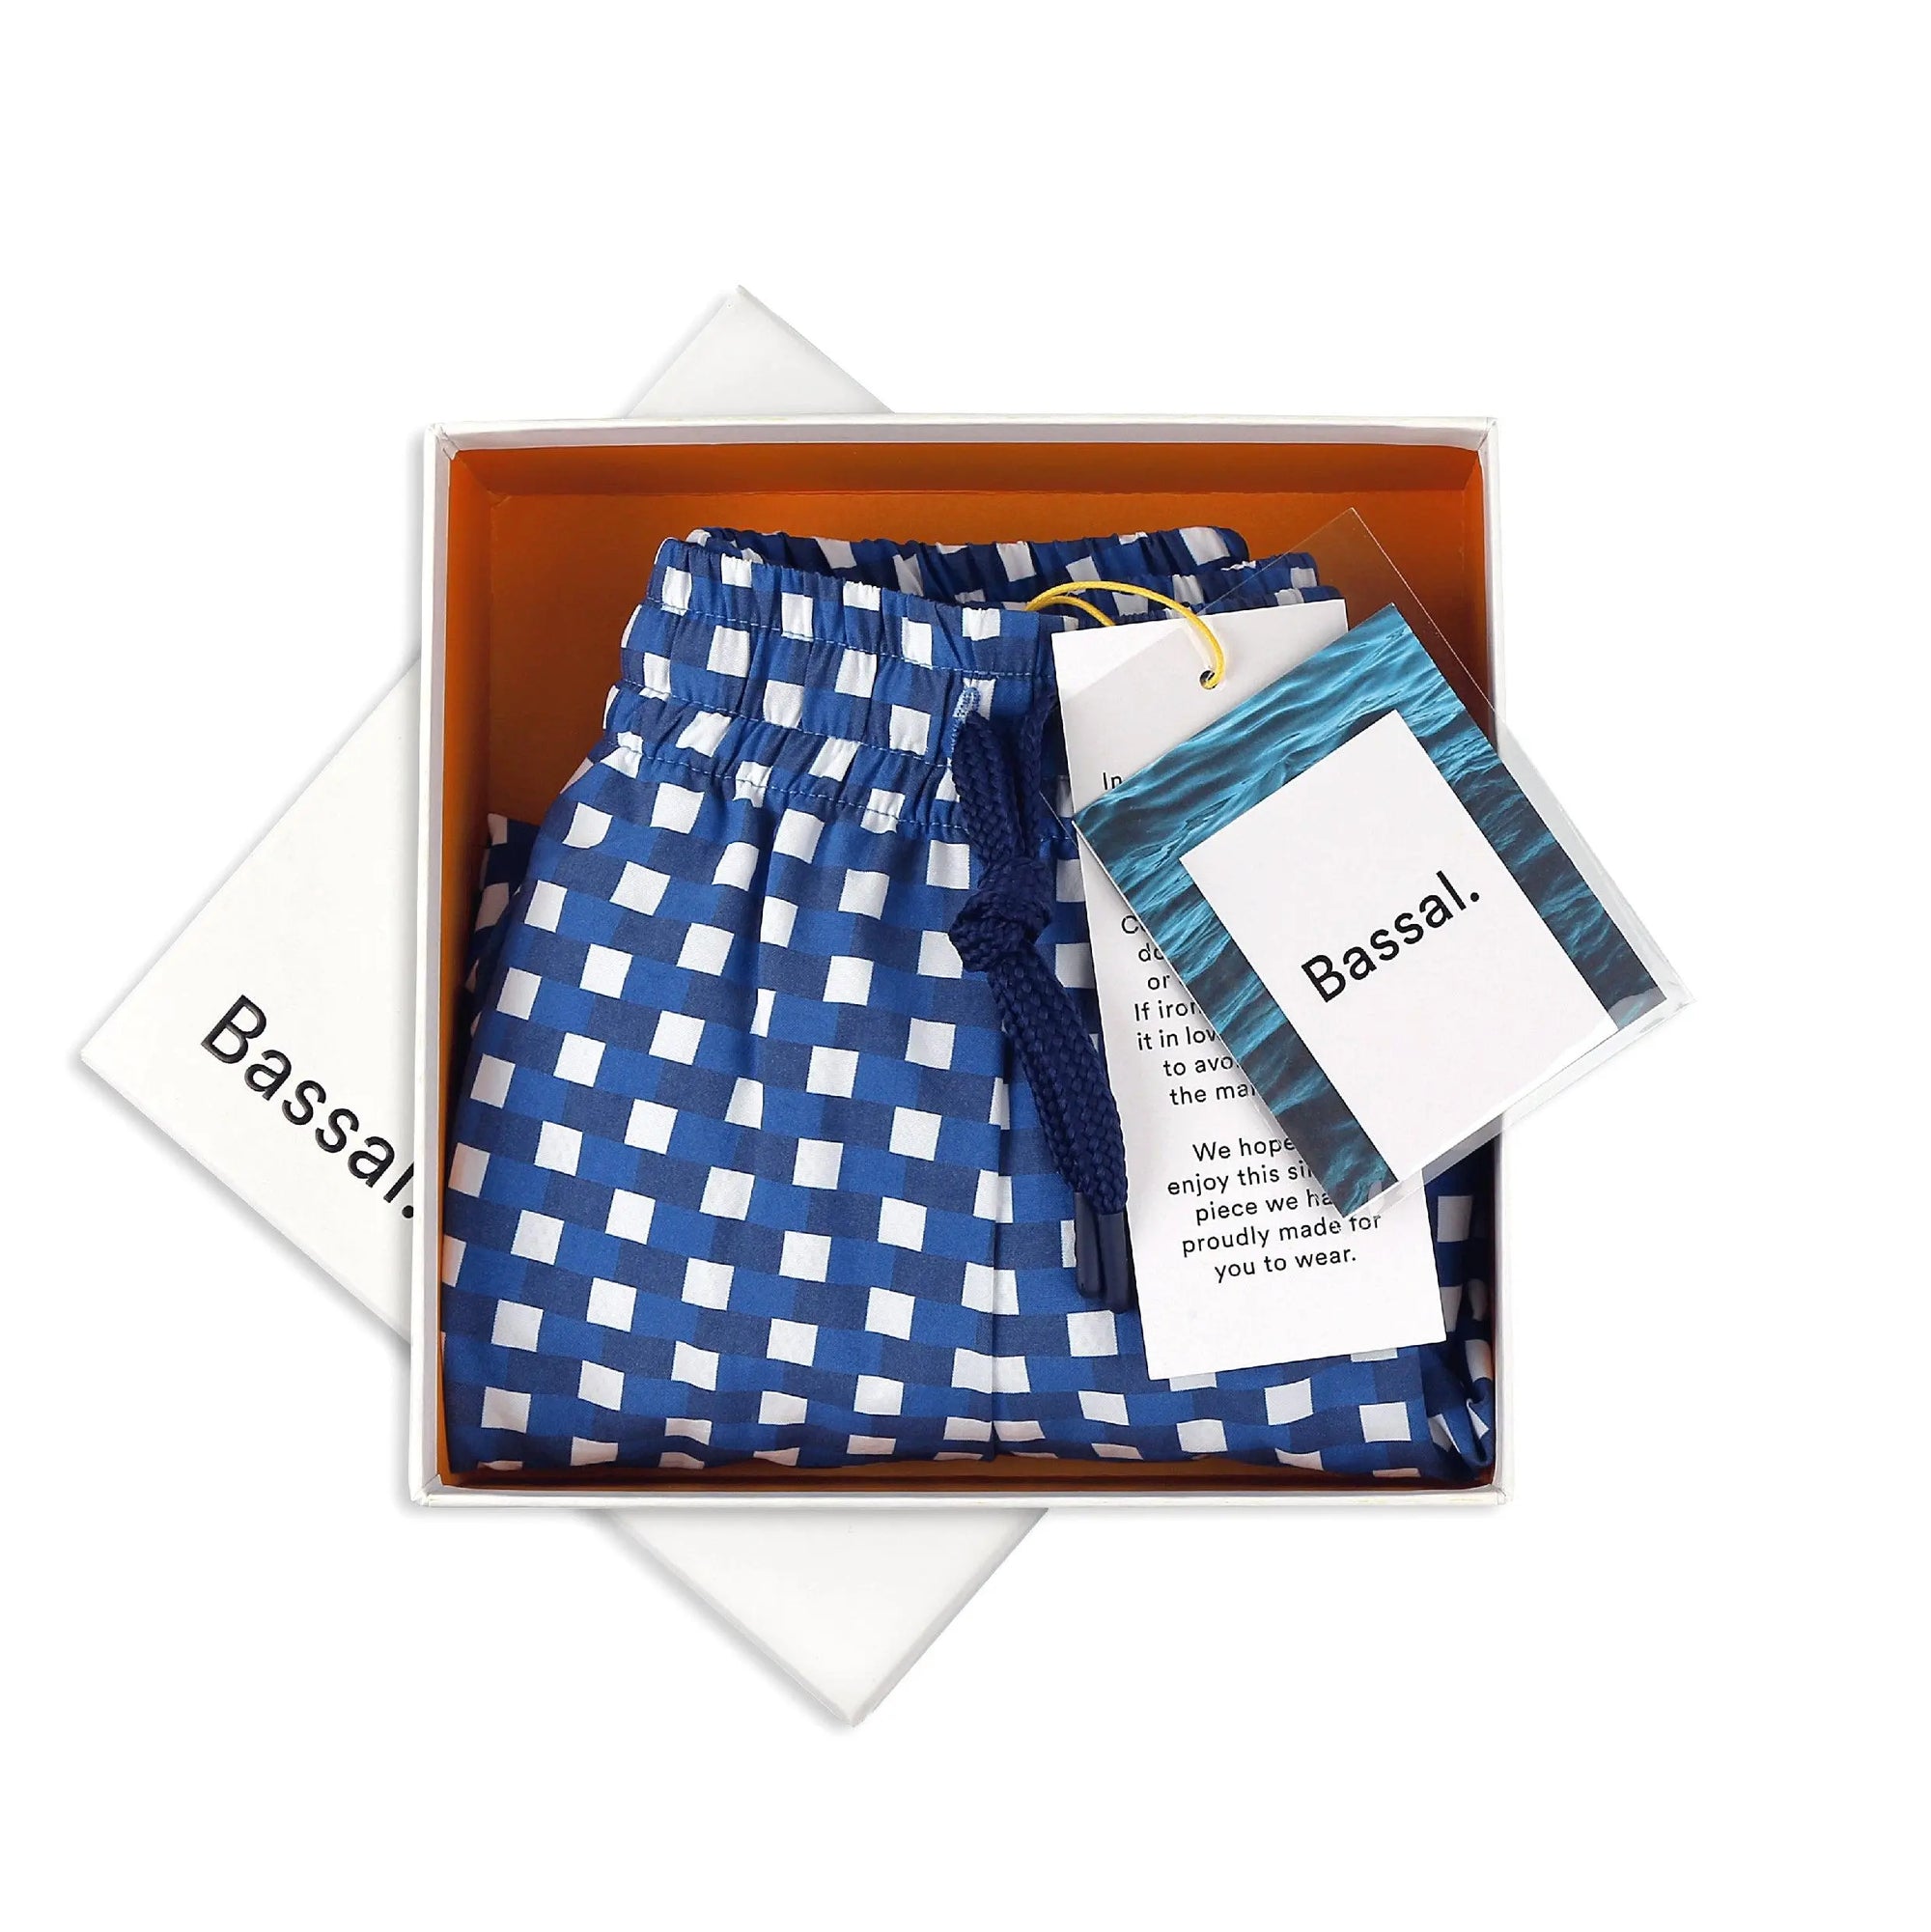 A pair of Paris Blue Swimwear is neatly folded inside an orange box with white edges. Attached to the swimwear are a white tag with the brand name "Bassal." and a card. The box lid, partially visible, also bears the brand name "Bassalstore," likely from their Barcelona store.